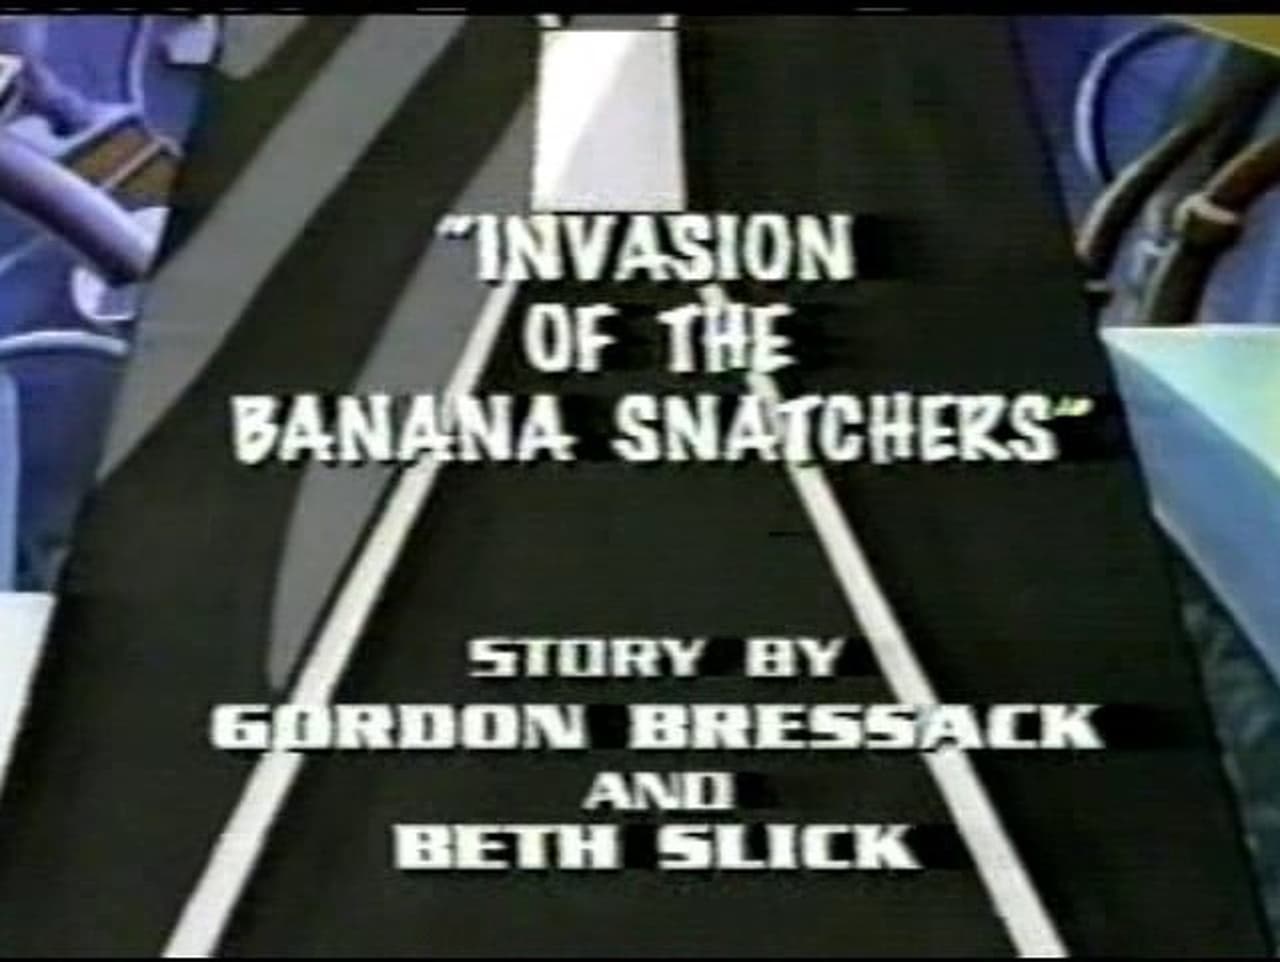 Invasion of the Banana Snatchers